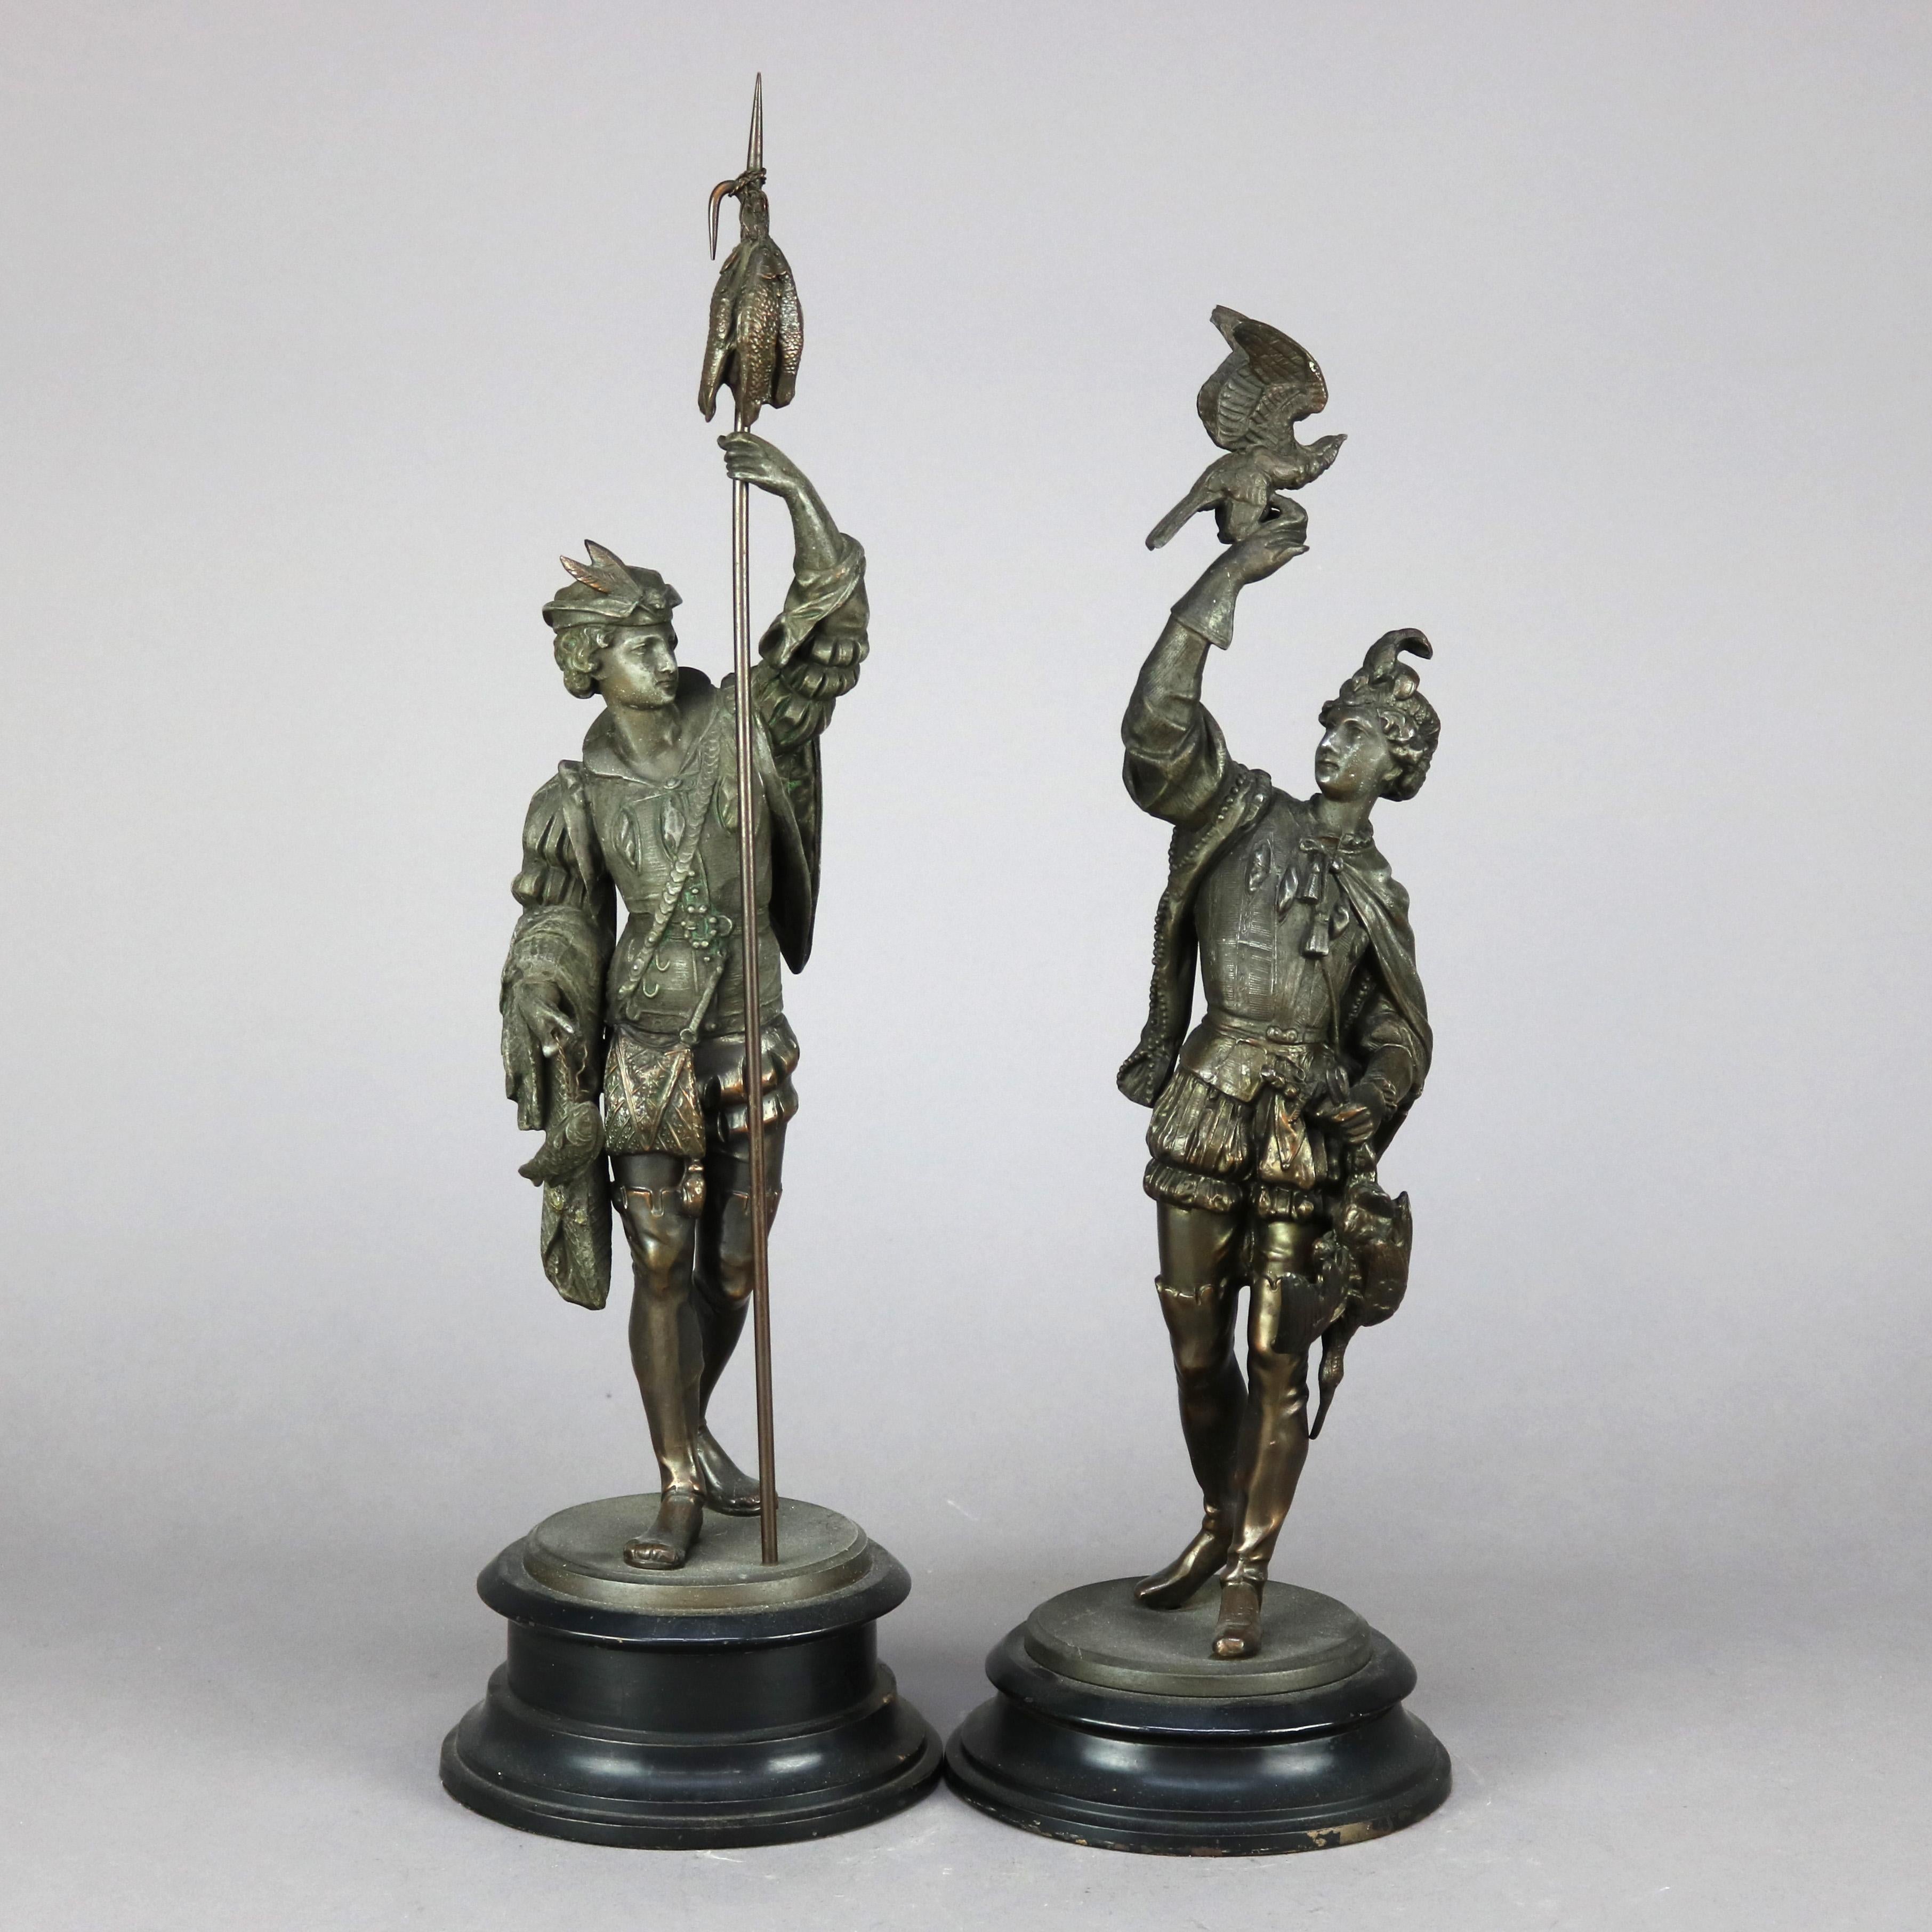 A pair of antique sculptures offer cast metal construction depicting Renaissance men, falconer, fisherman and fowl hunter with birds, seated on ebonized bases, c1890

Measure - 21.25'' H x 6'' W x 6'' D.